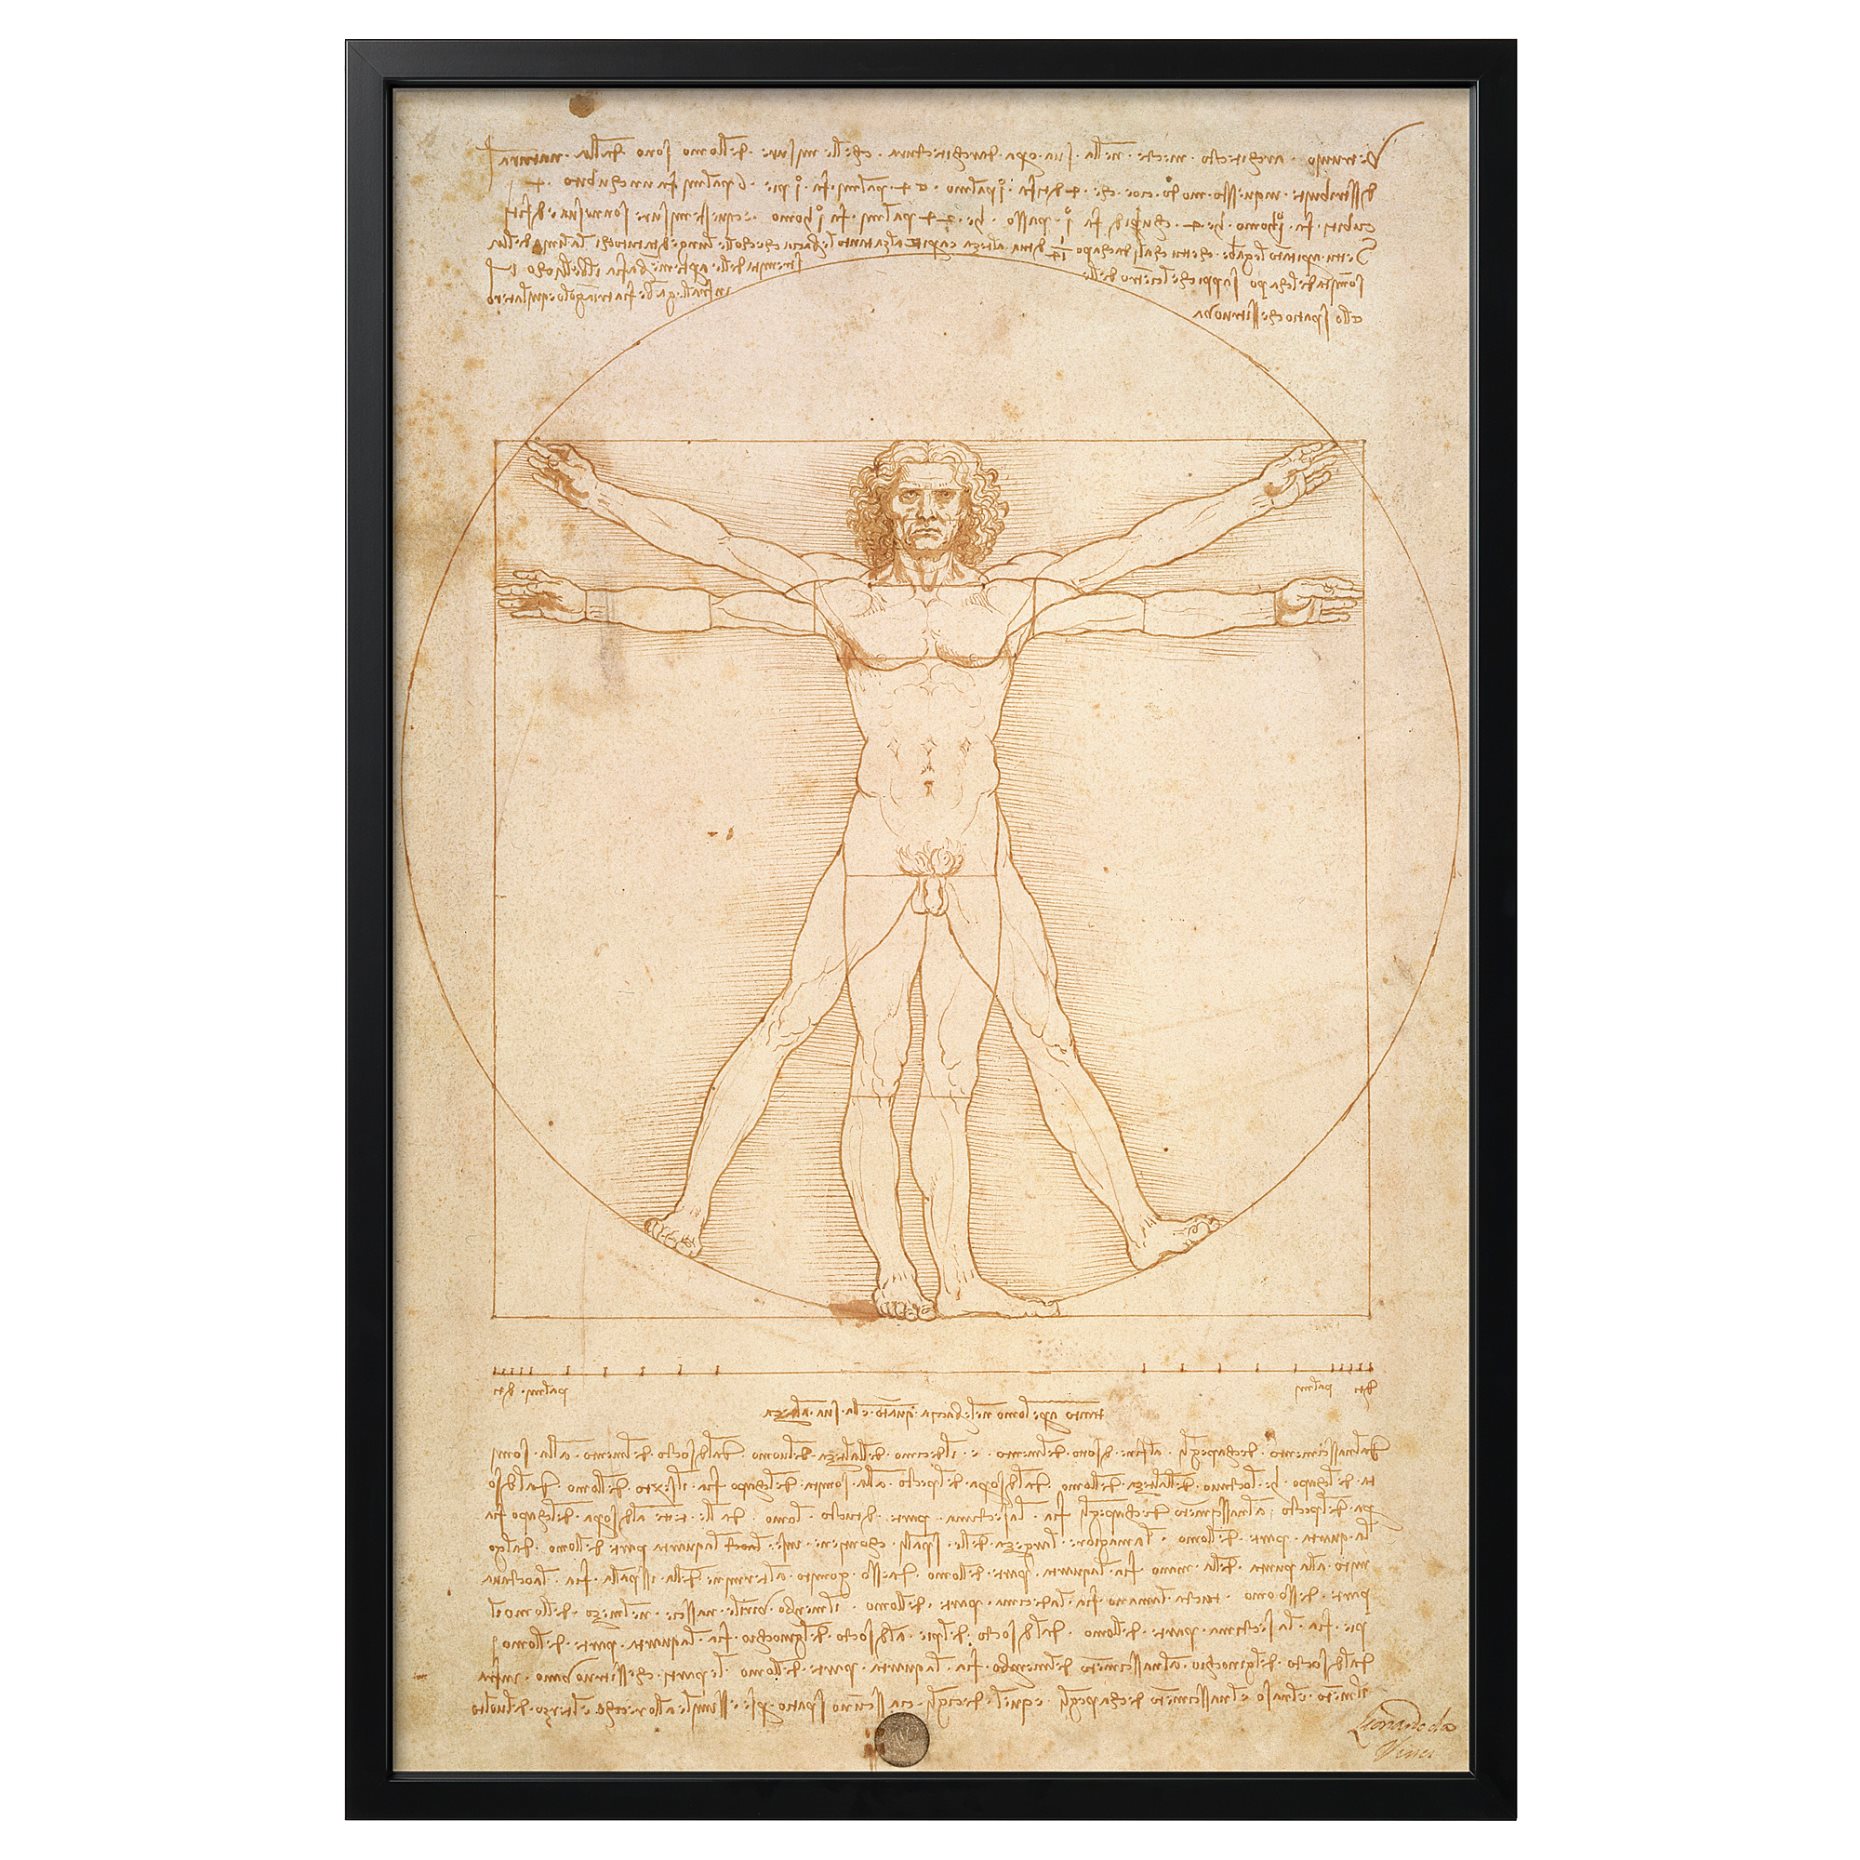 BJÖRKSTA, picture with frame/The Vitruvian Man, 78x118 cm, 493.849.83